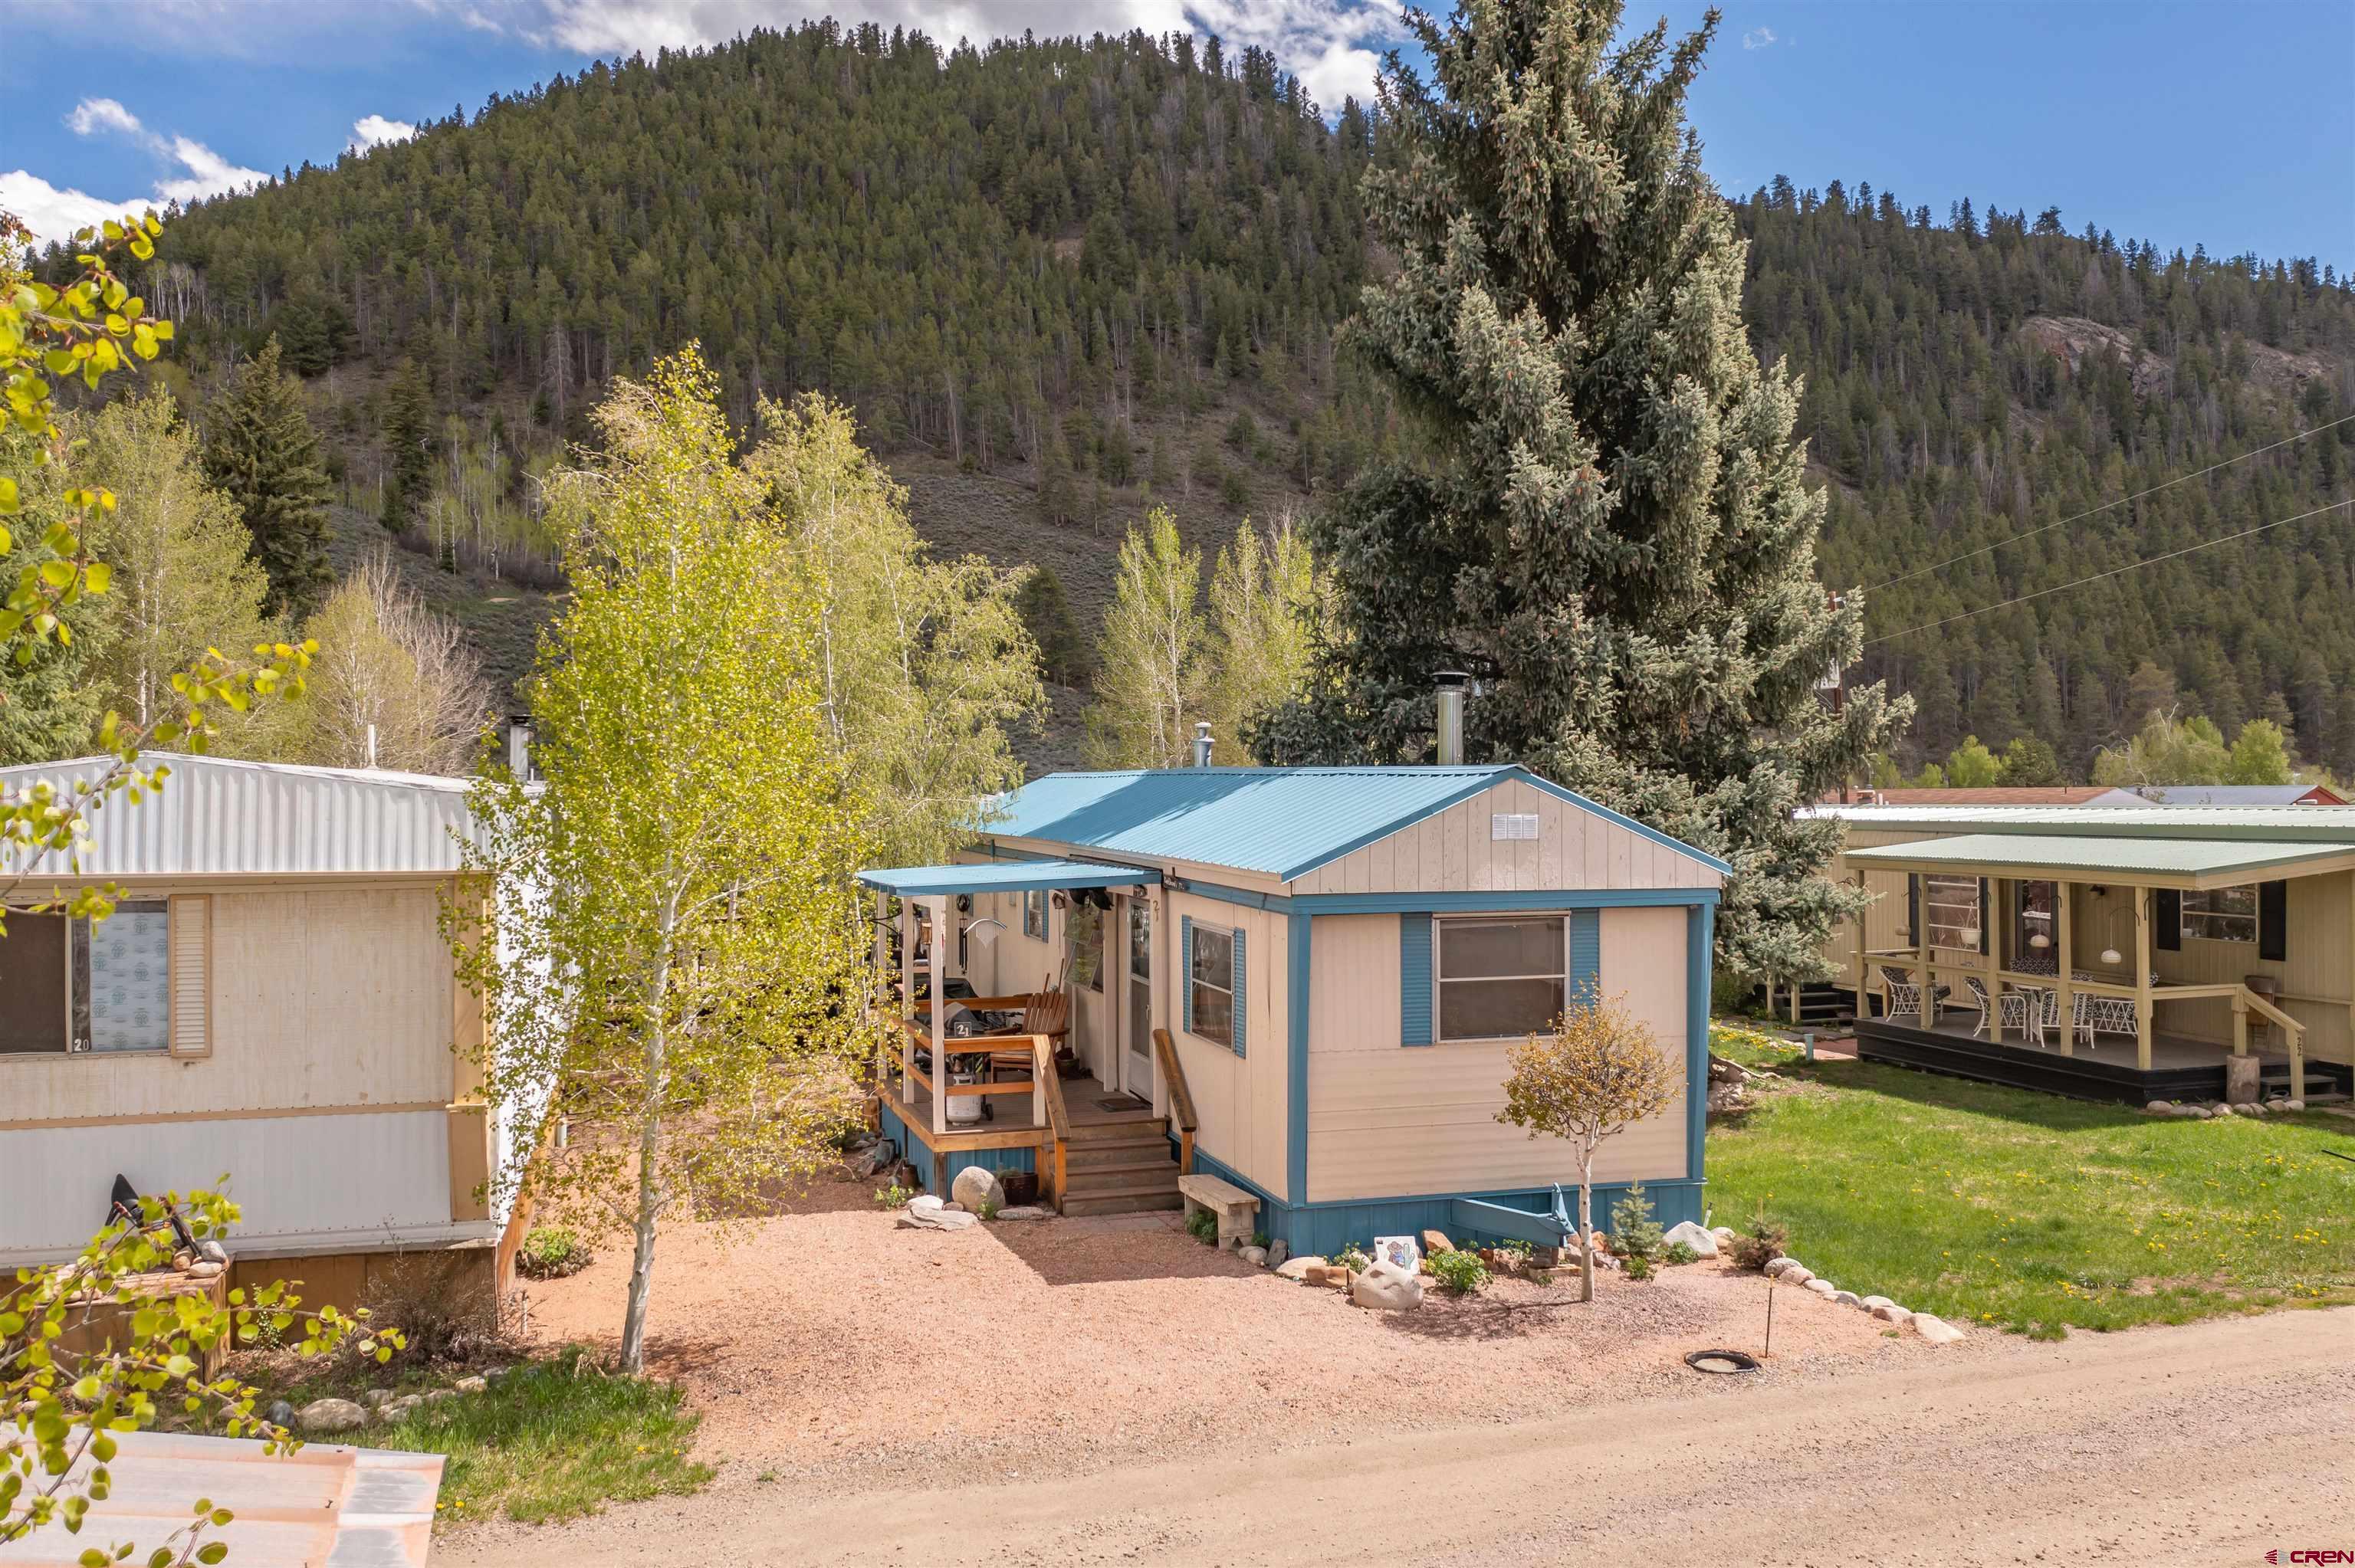 95 George Bailey Drive, Almont, CO 81210